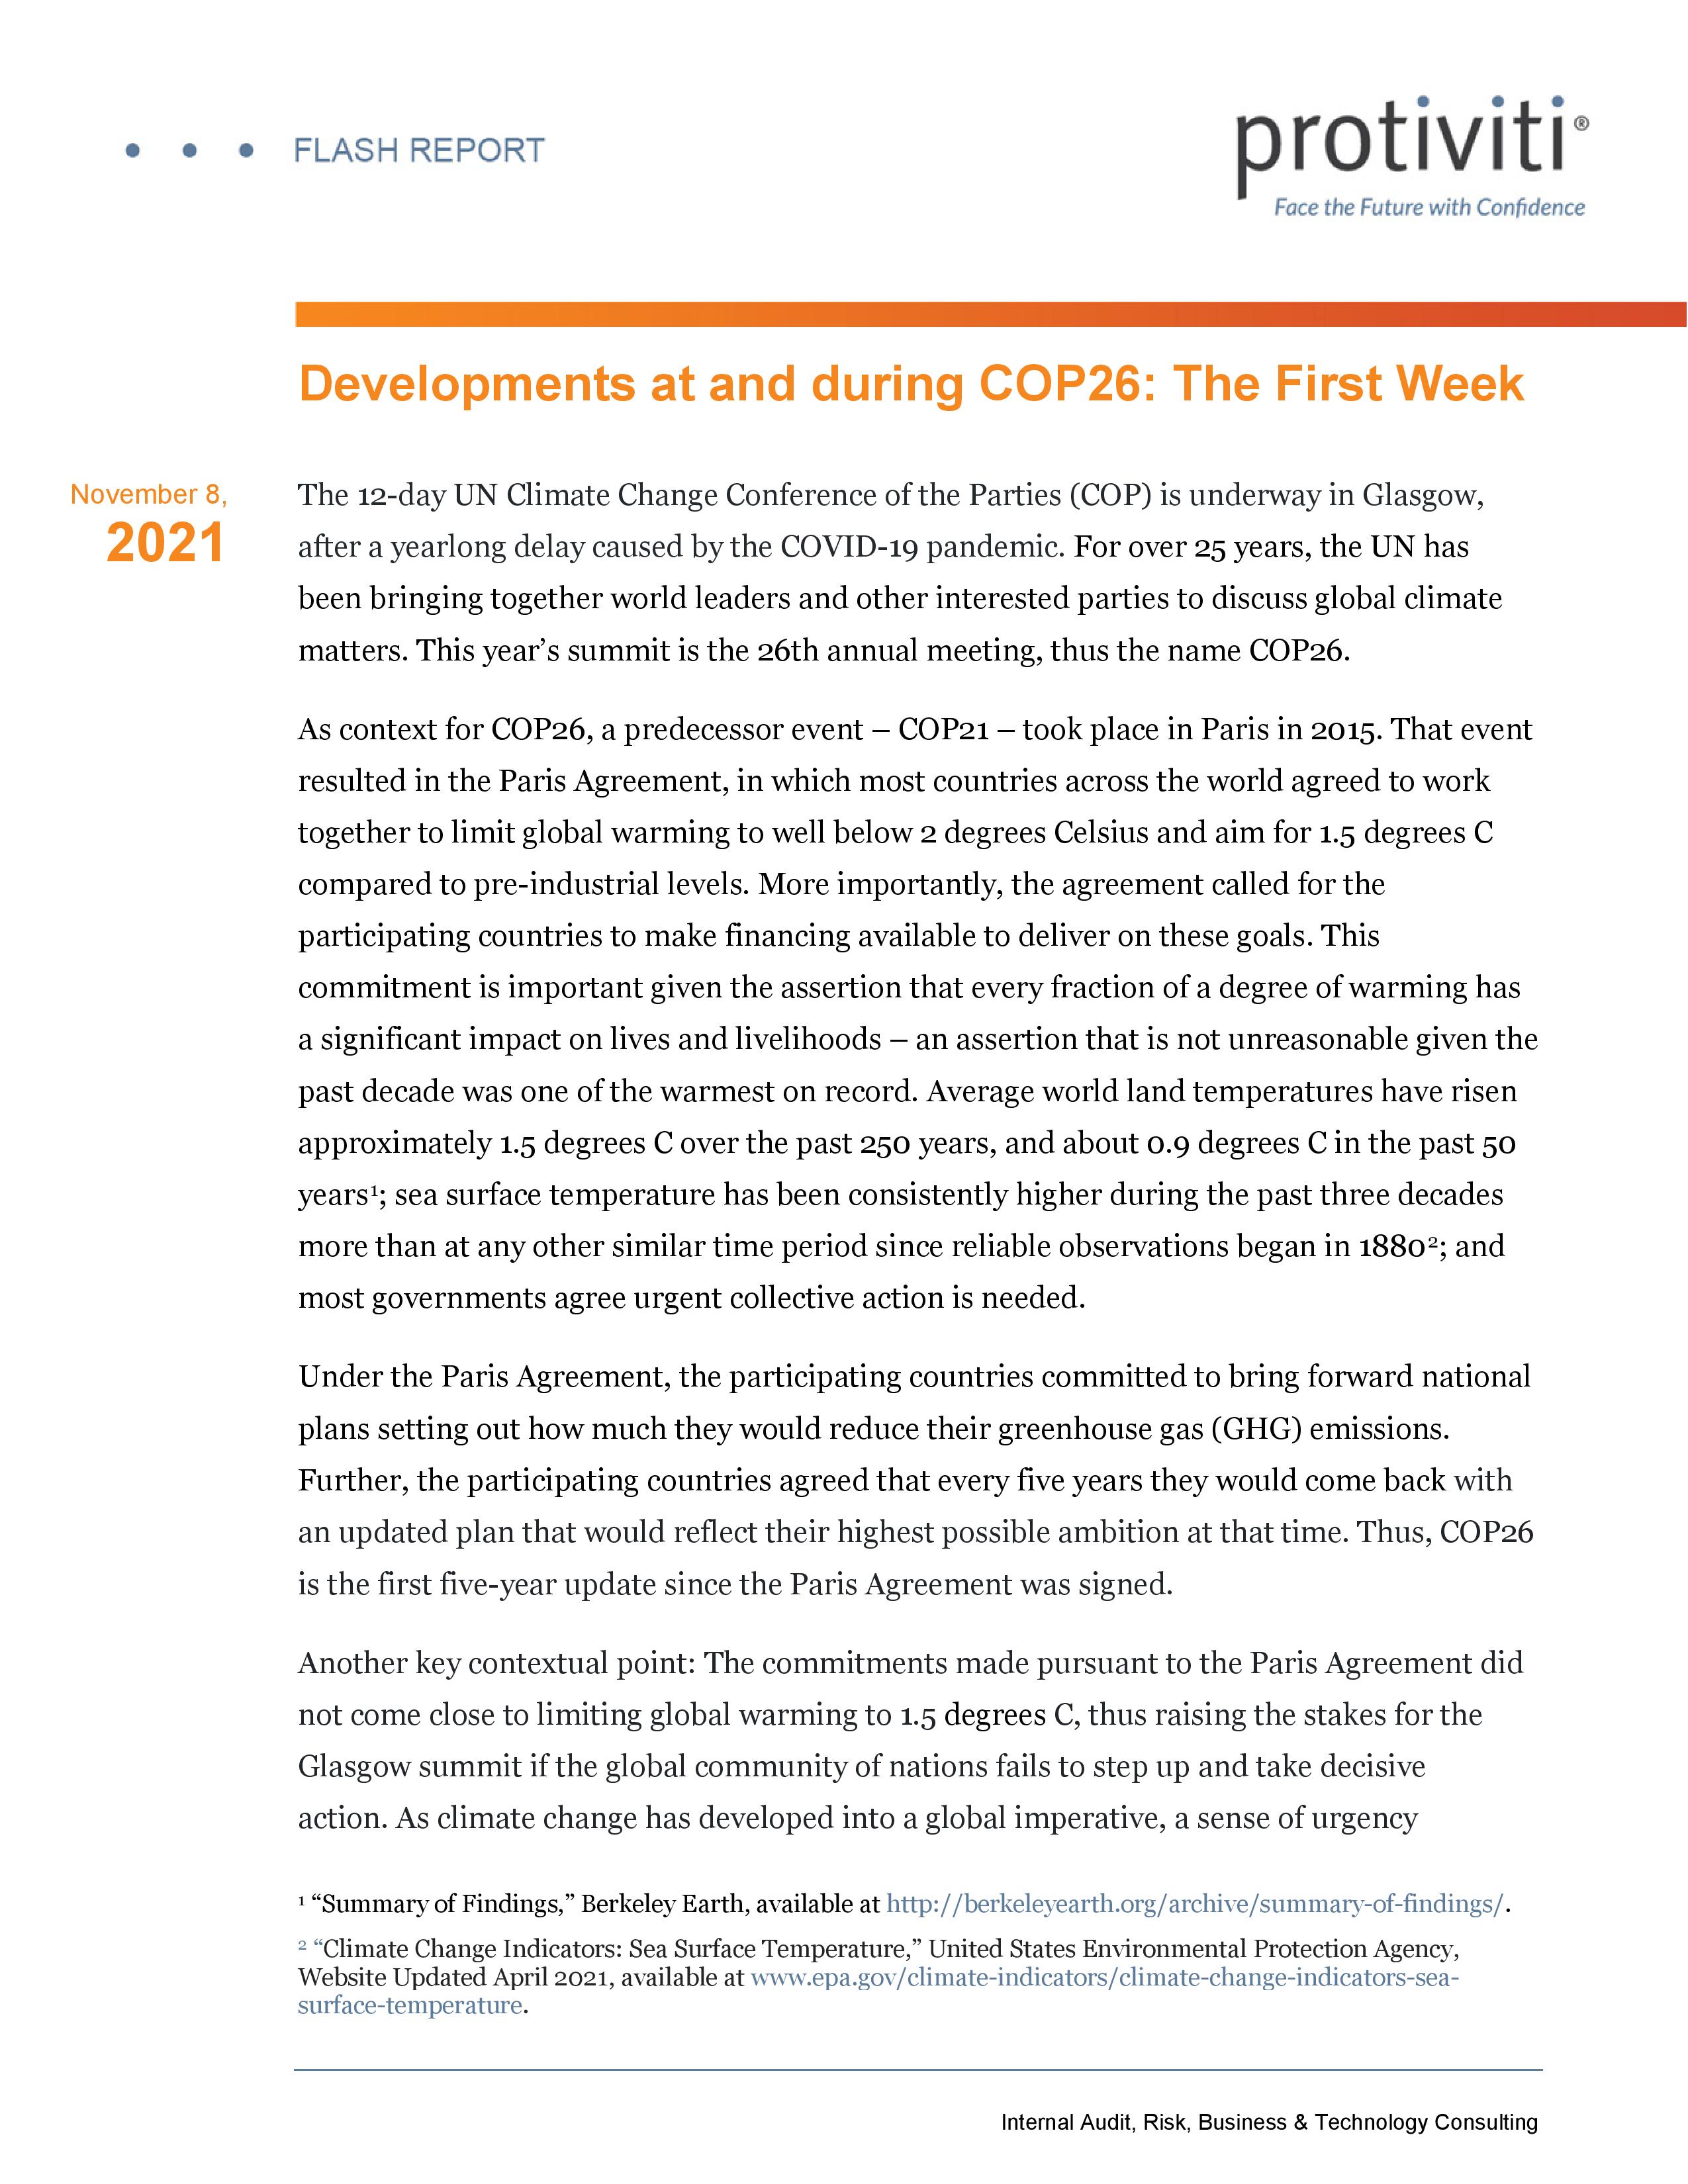 Screenshot of the first page of protiviti-flash-report-cop26-developments-first-week-110821-page-001